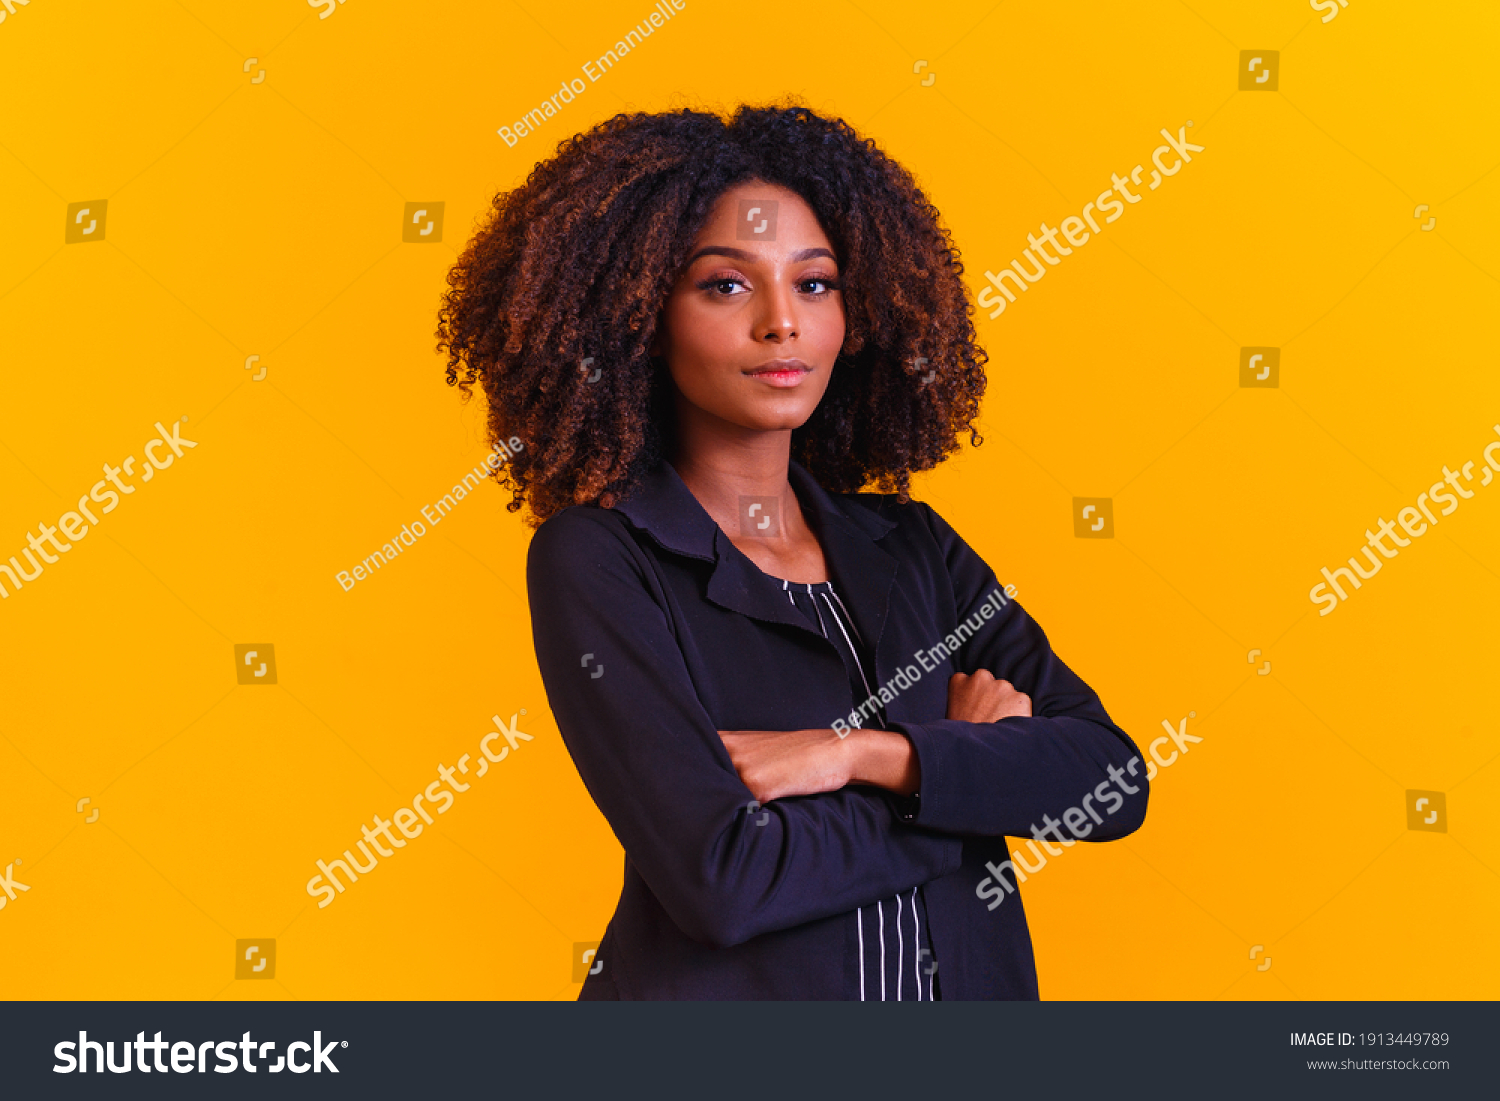 Successful Black Woman Business Woman Afro Stock Photo 1913449789 ...